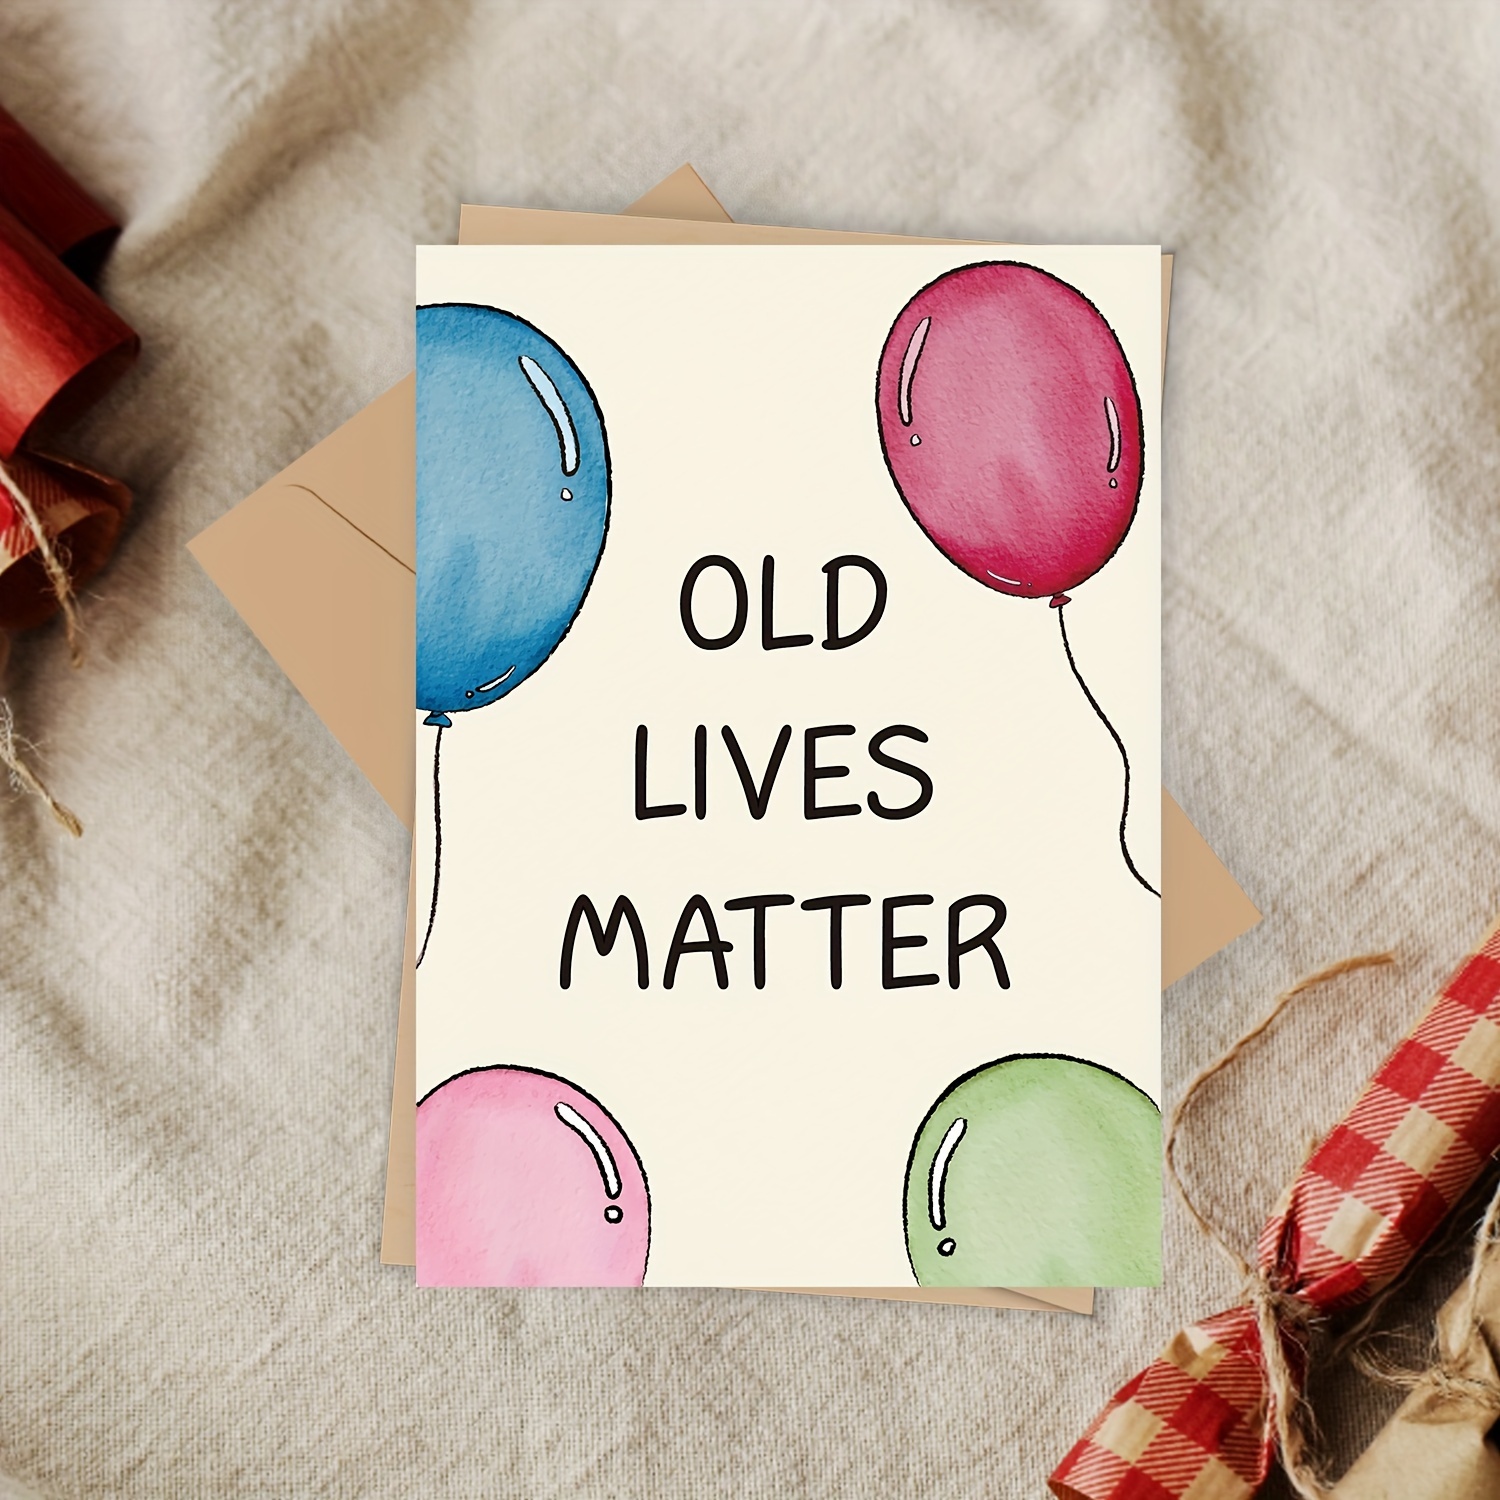 Old Lives Still Matter Gifts for Men - Retirement Gifts for Senior  Citizens, Old Fashioned Gag Gifts - Funny Birthday Gifts for Old Man, Dad,  Grandpa